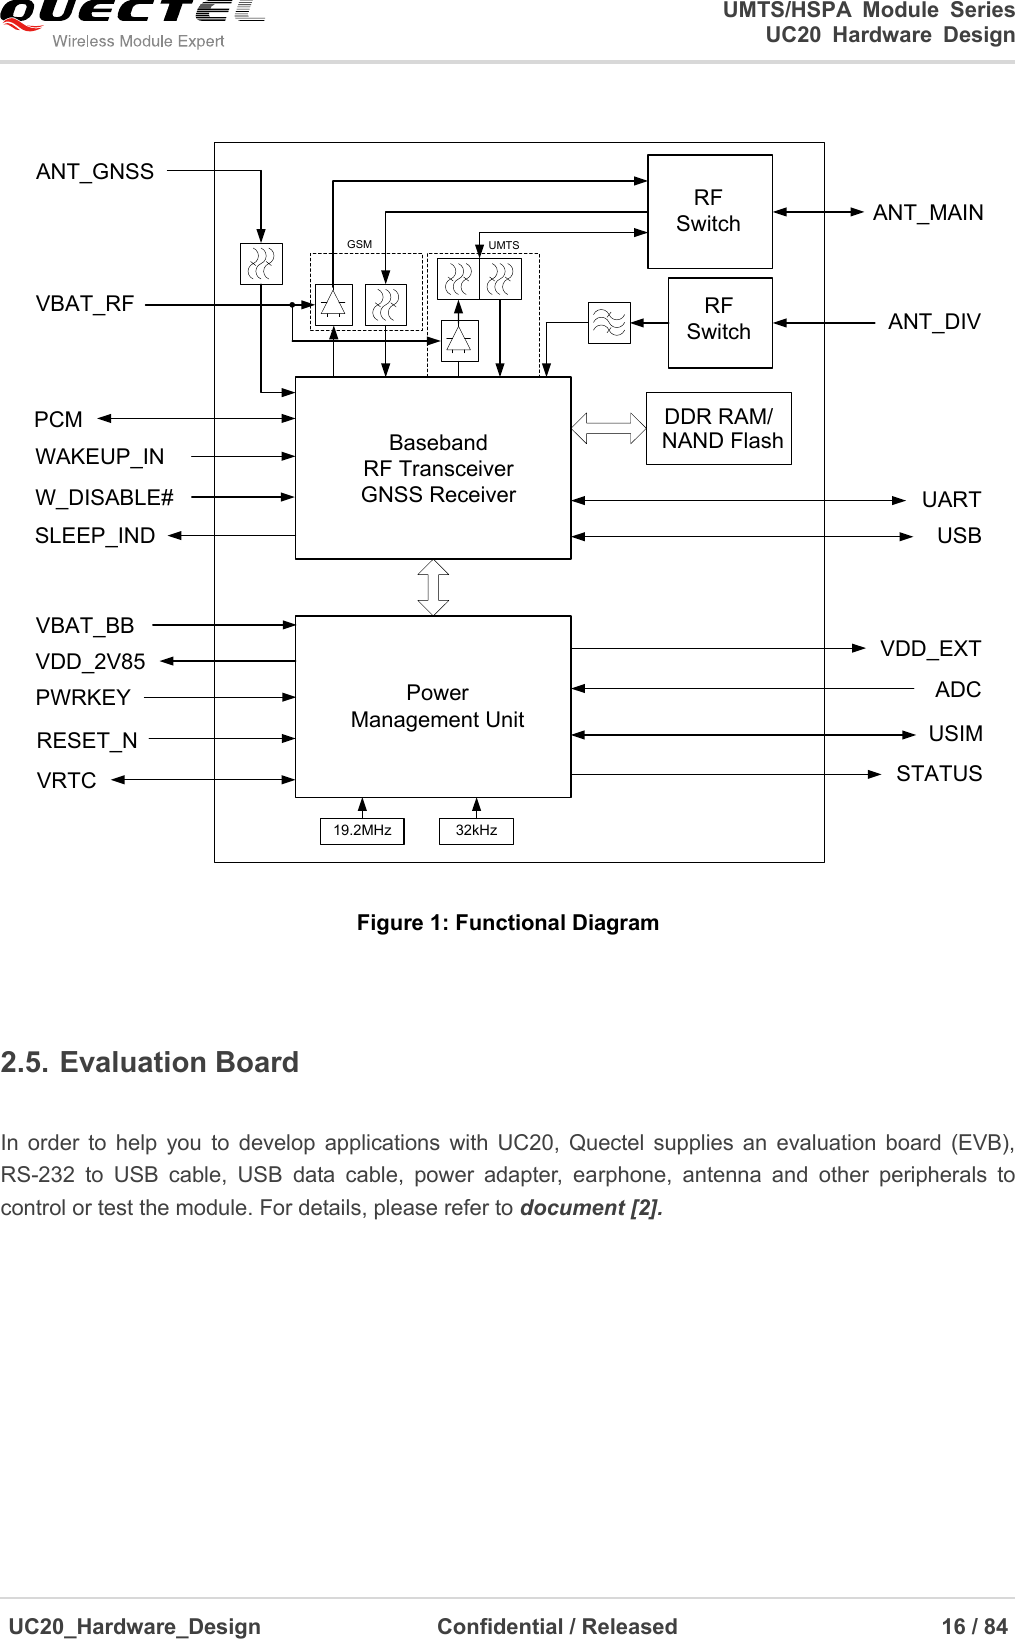                                                                                                                                               UMTS/HSPA  Module  Series                                                                 UC20  Hardware  Design  UC20_Hardware_Design                  Confidential / Released                            16 / 84     PWRKEYRESET_N 32kHz  19.2MHzPower Management Unit  BasebandRF TransceiverGNSS ReceiverANT_GNSSRF SwitchDDR RAM/ANT_MAINUSIMSTATUSADCPCMUARTVBAT_BBUSBANT_DIVVBAT_RFVDD_EXTGSM  UMTSRF SwitchVDD_2V85WAKEUP_INVRTCSLEEP_INDW_DISABLE#NAND Flash Figure 1: Functional Diagram  2.5. Evaluation Board    In  order  to  help  you  to  develop  applications  with  UC20,  Quectel  supplies an  evaluation  board  (EVB), RS-232  to  USB  cable,  USB  data  cable,  power  adapter,  earphone,  antenna  and  other  peripherals  to control or test the module. For details, please refer to document [2]. 